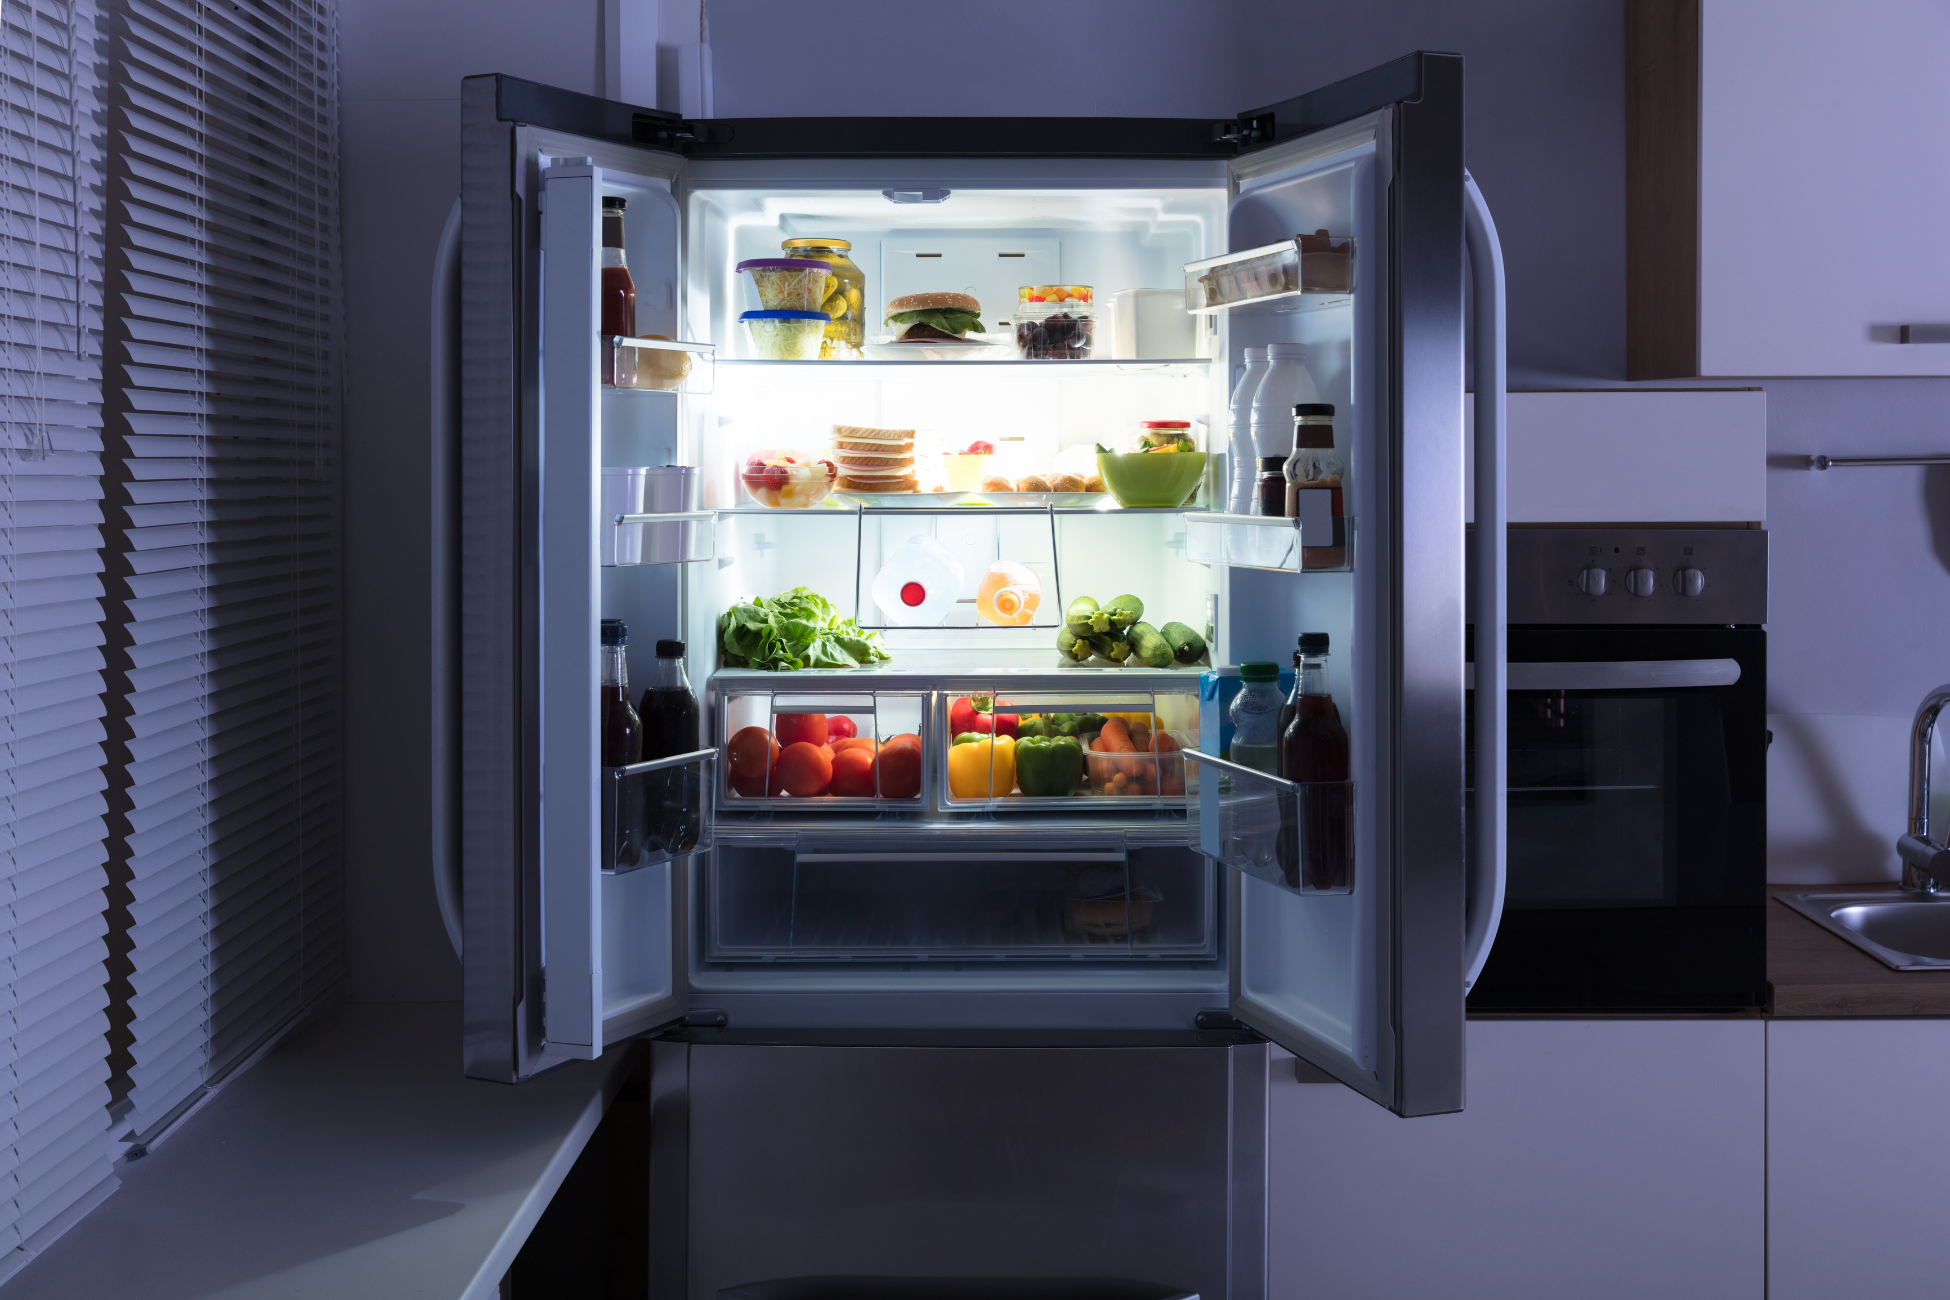 How to Organize Your Fridge for Maximum Freshness and Efficiency